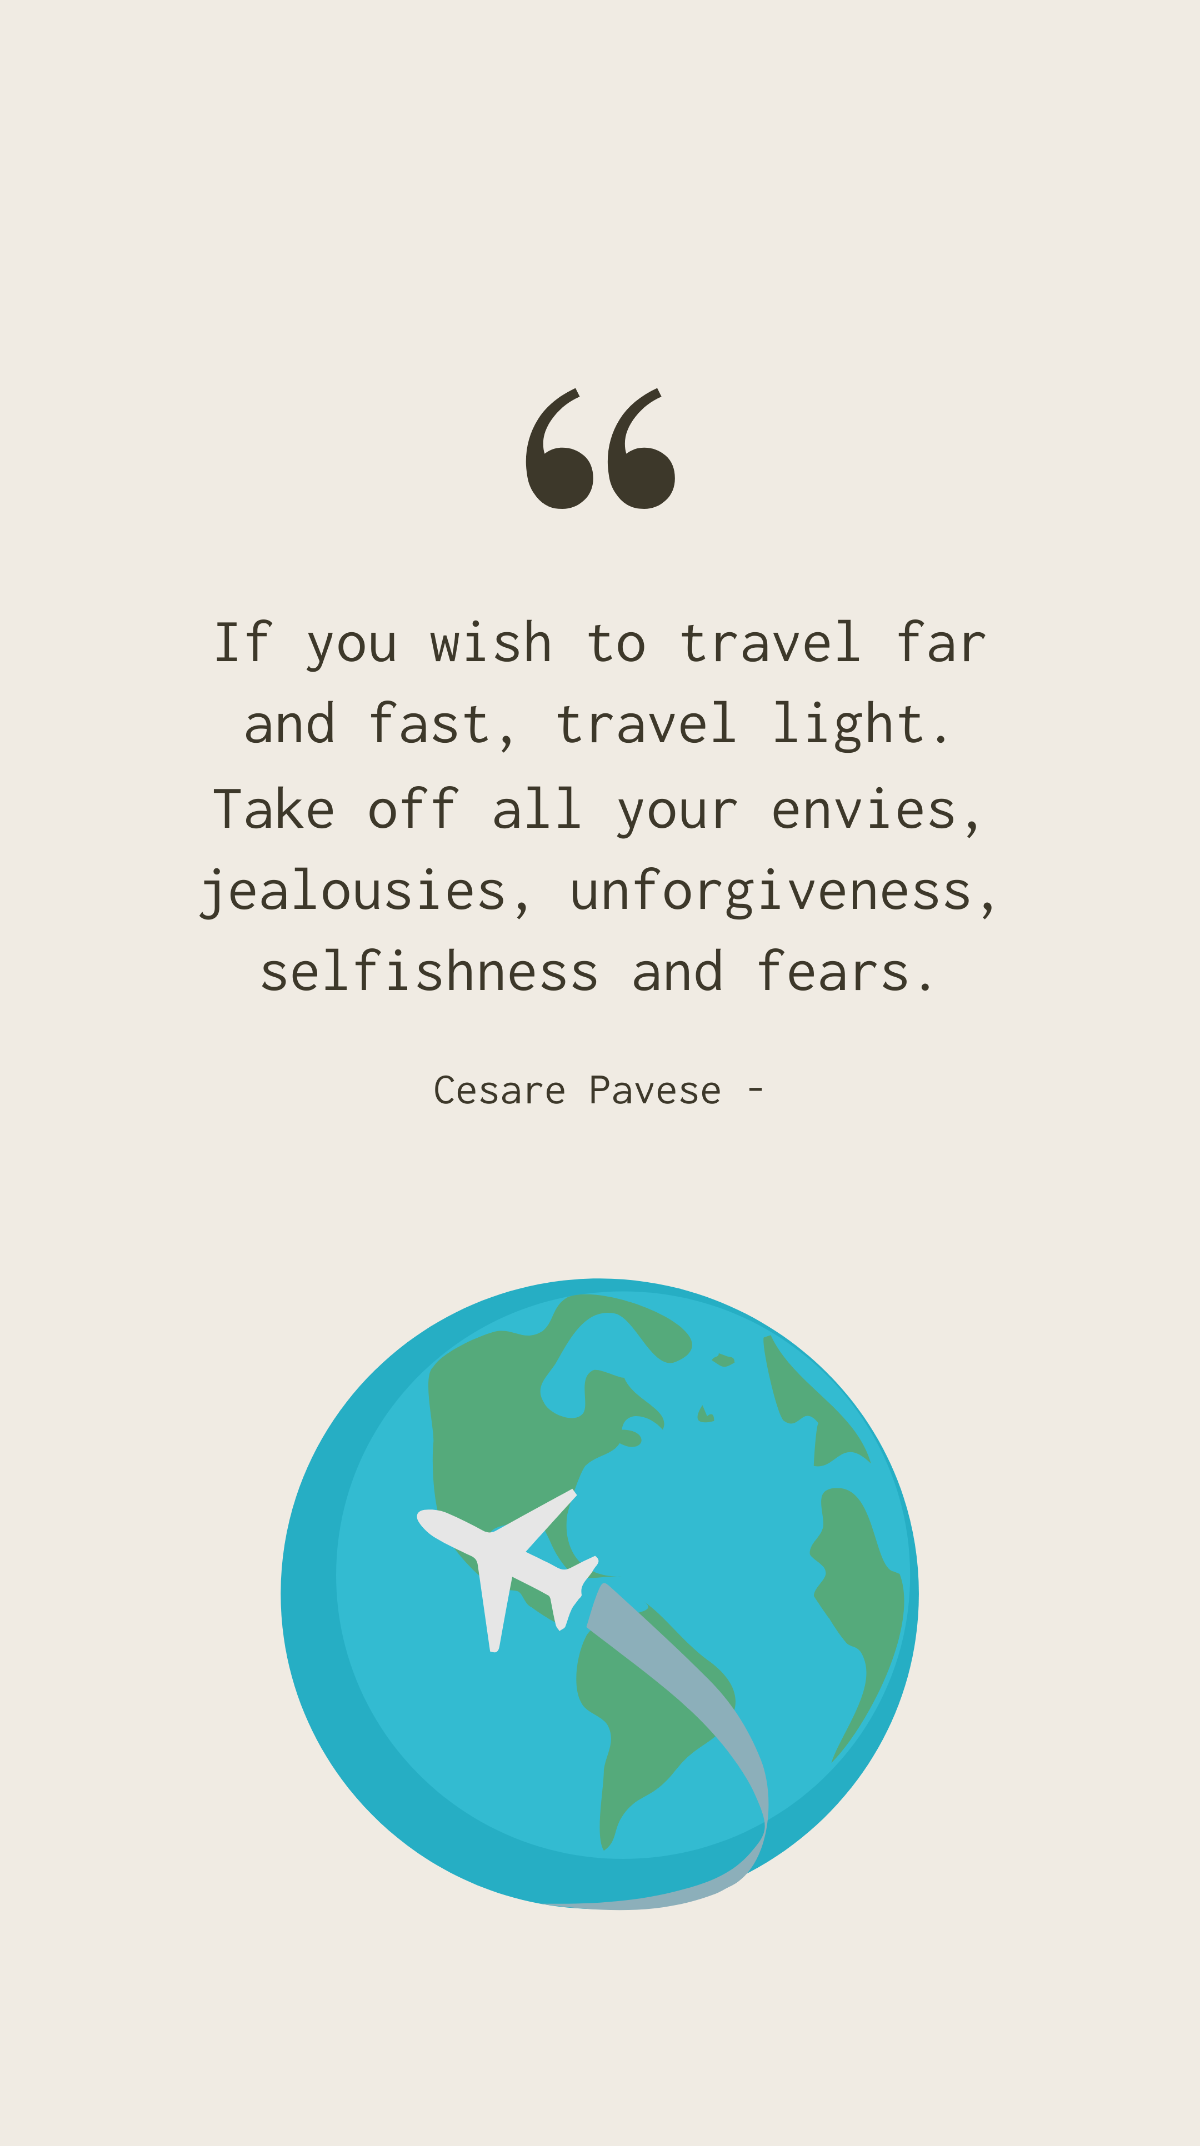 Cesare Pavese - If you wish to travel far and fast, travel light. Take off all your envies, jealousies, unforgiveness, selfishness and fears.